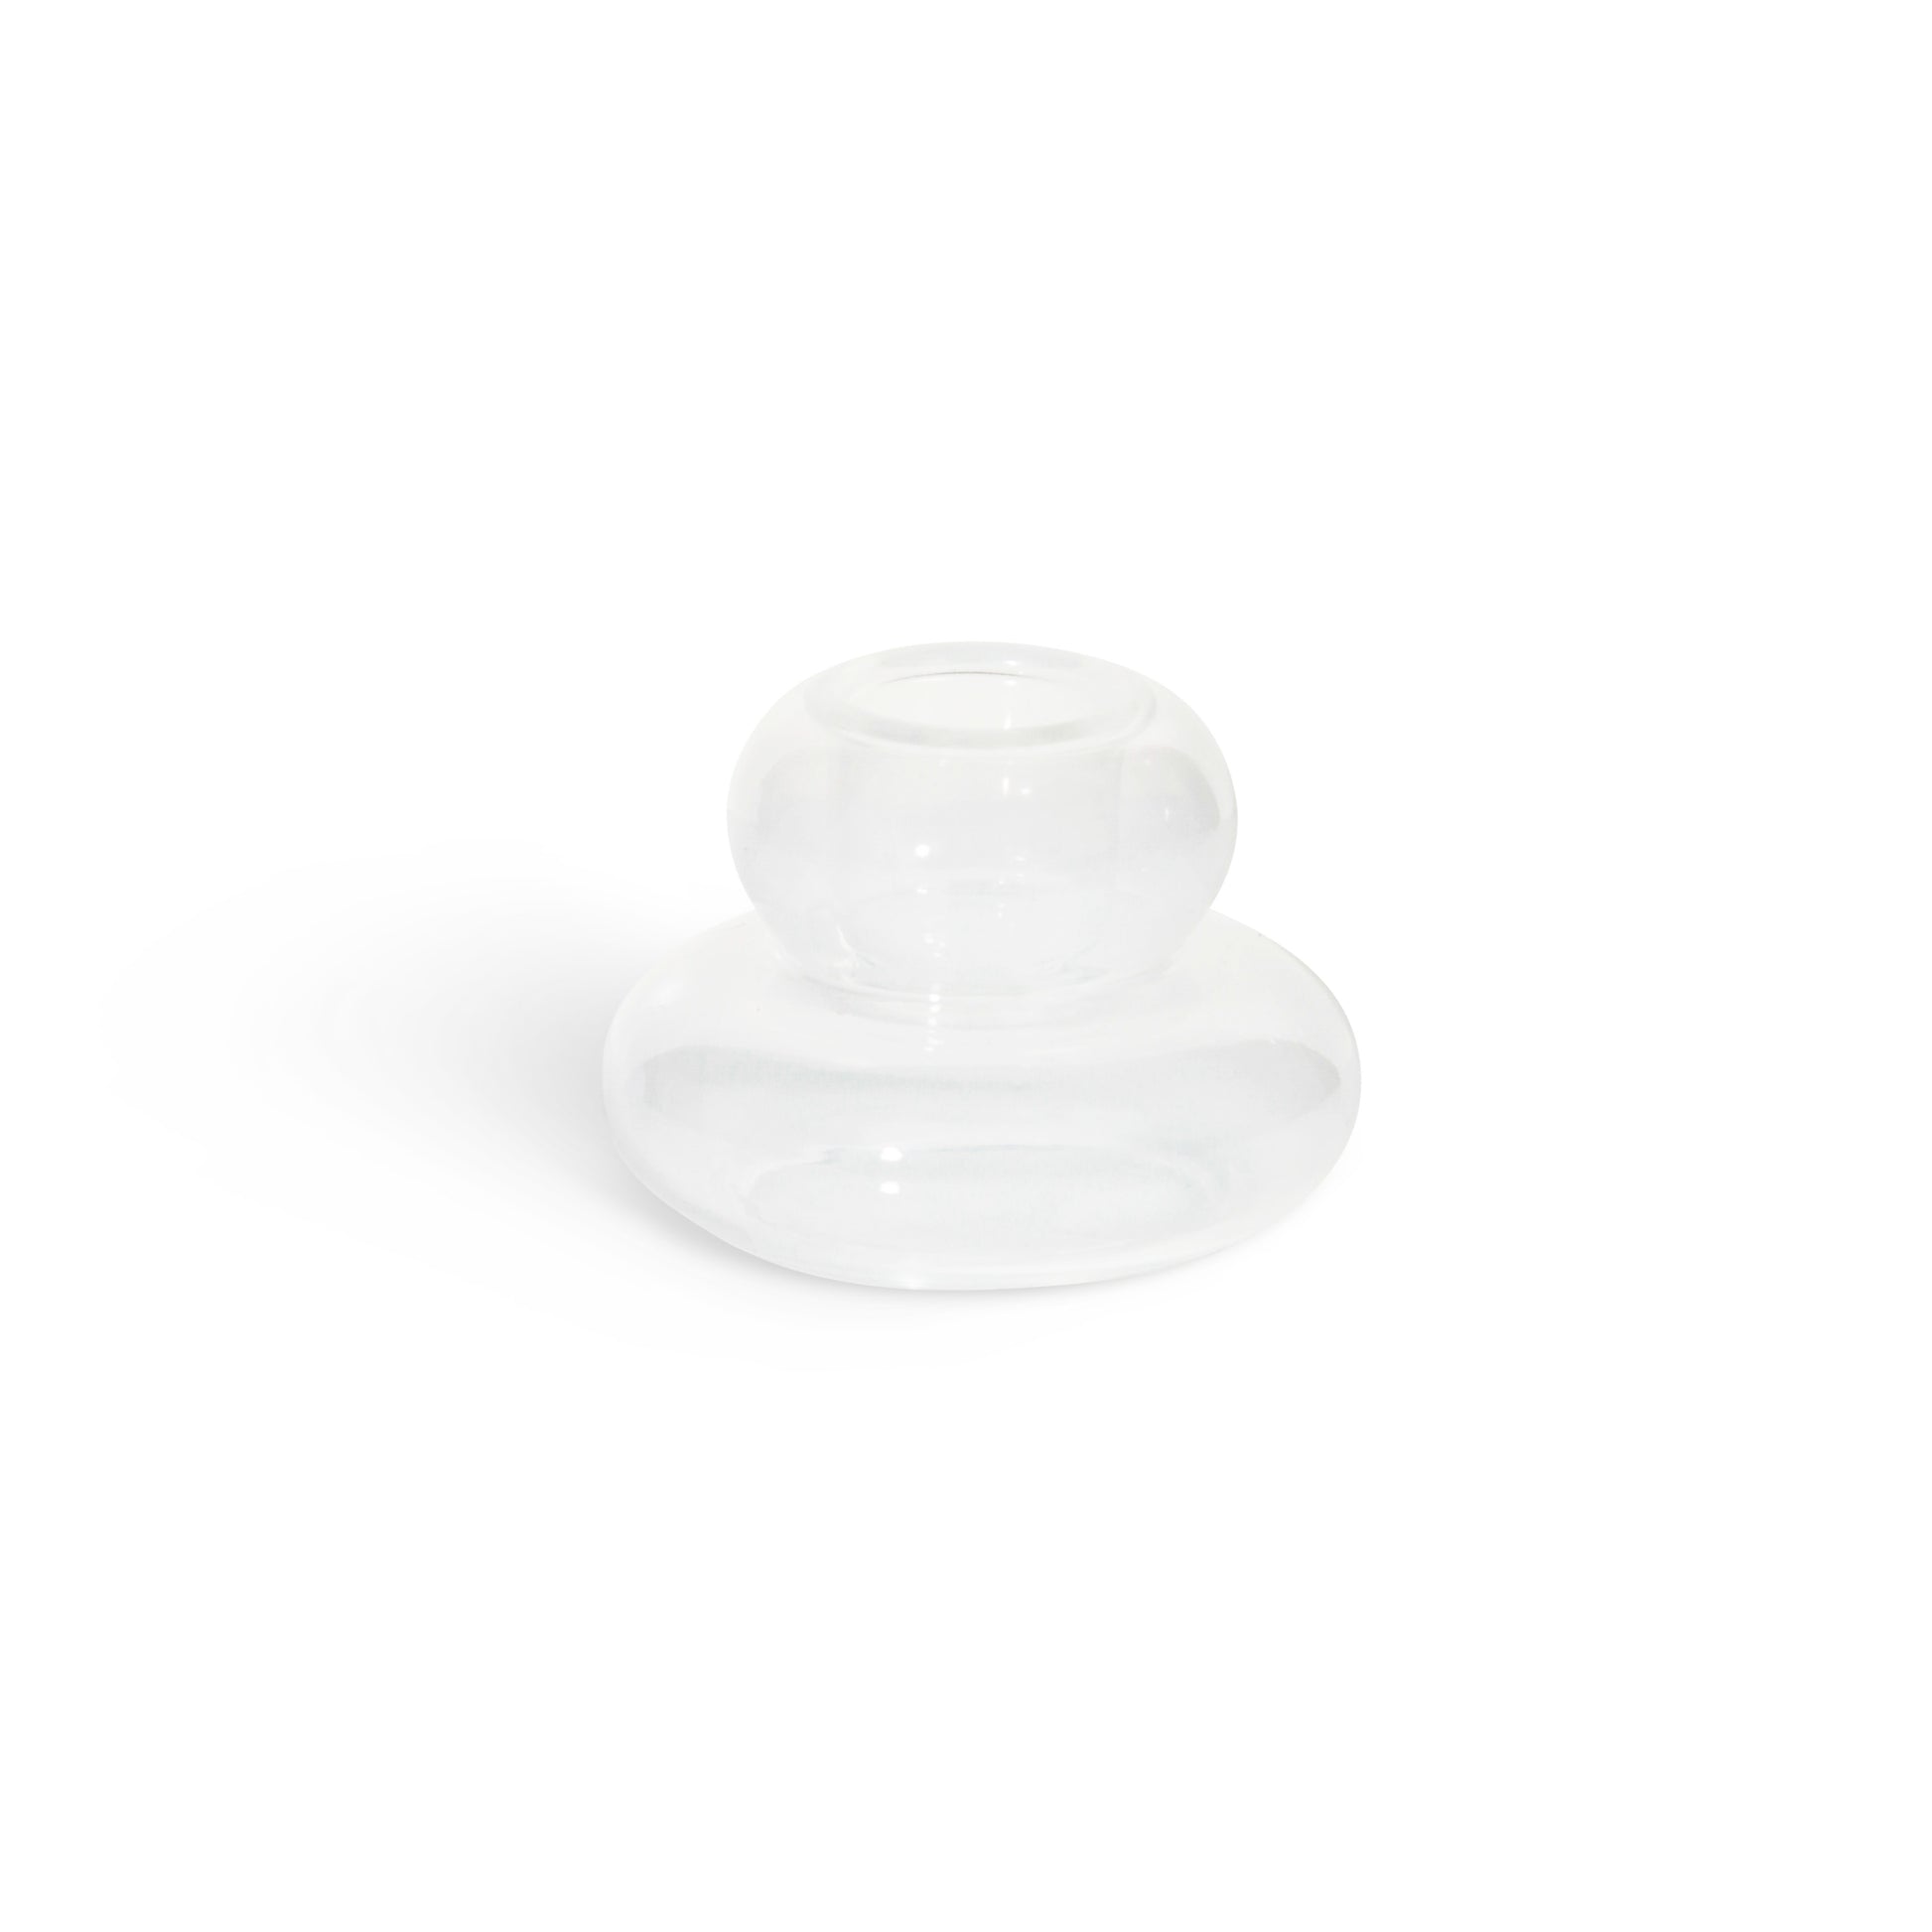 &k | CANDLE HOLDER WHIPPED SMALL - TRANSPARANT